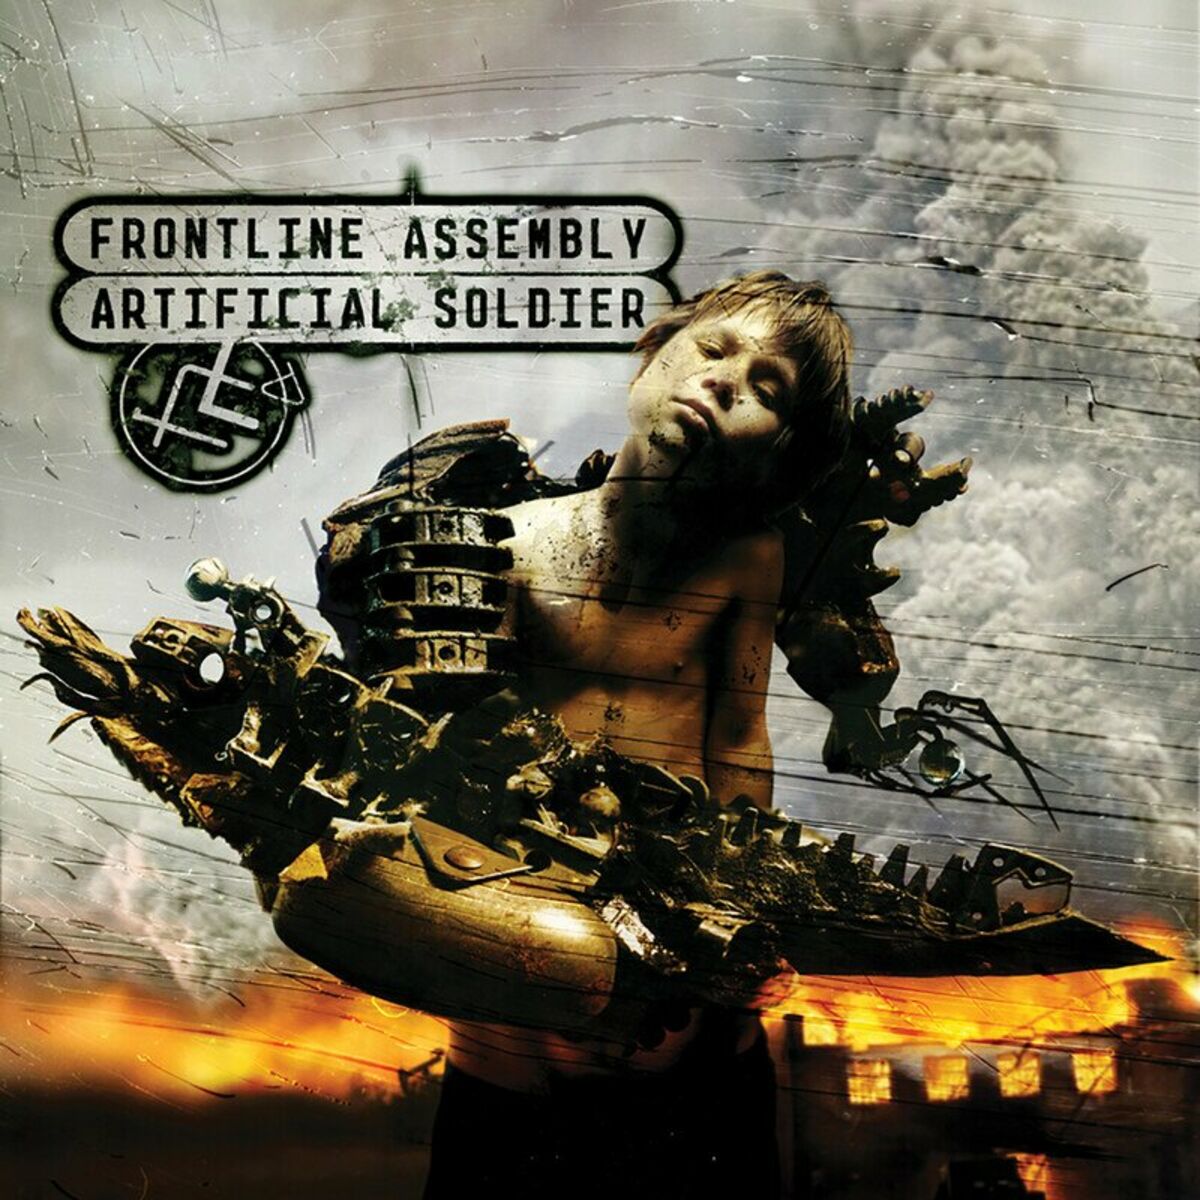 Front Line Assembly: albums, songs, playlists | Listen on Deezer